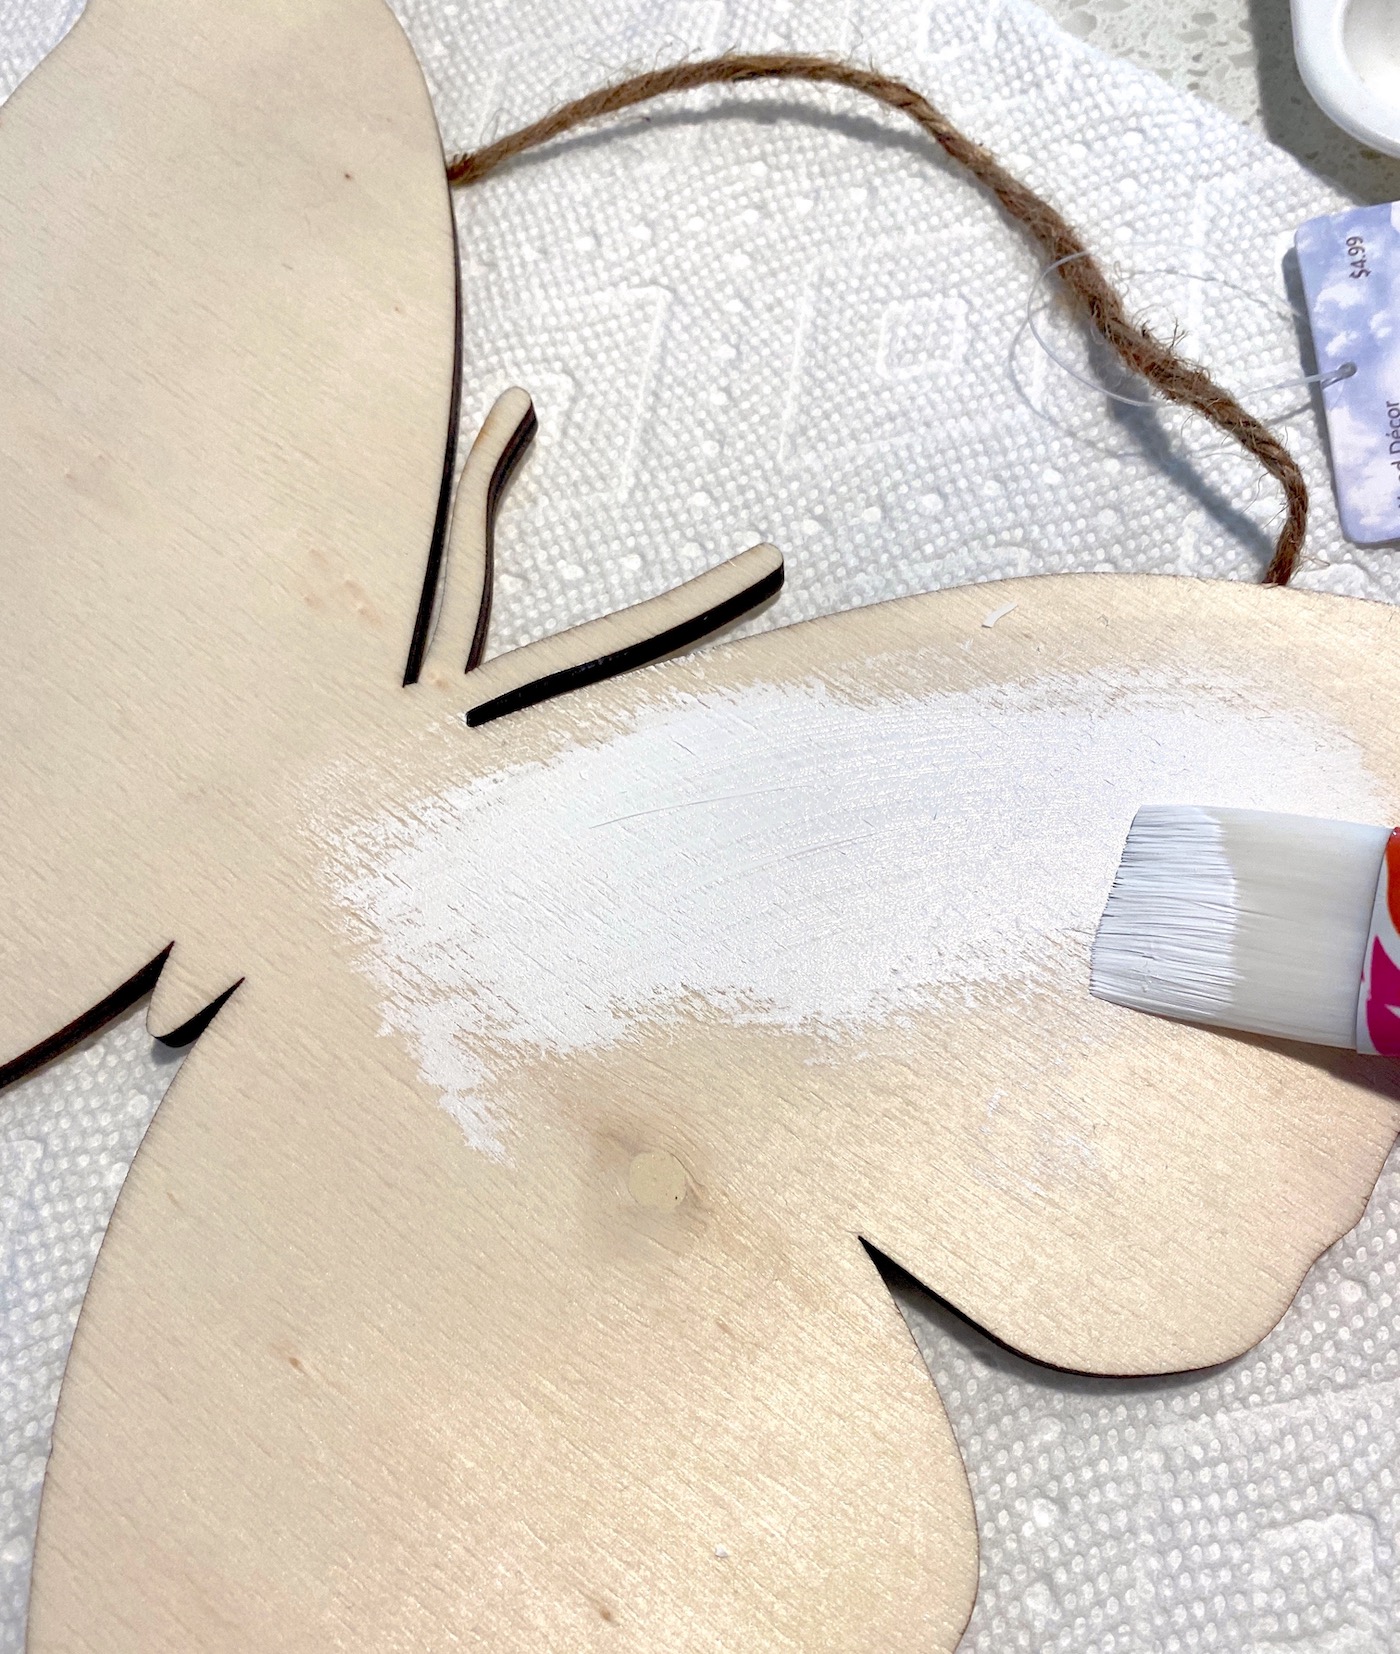 Painting the wood butterfly with white paint